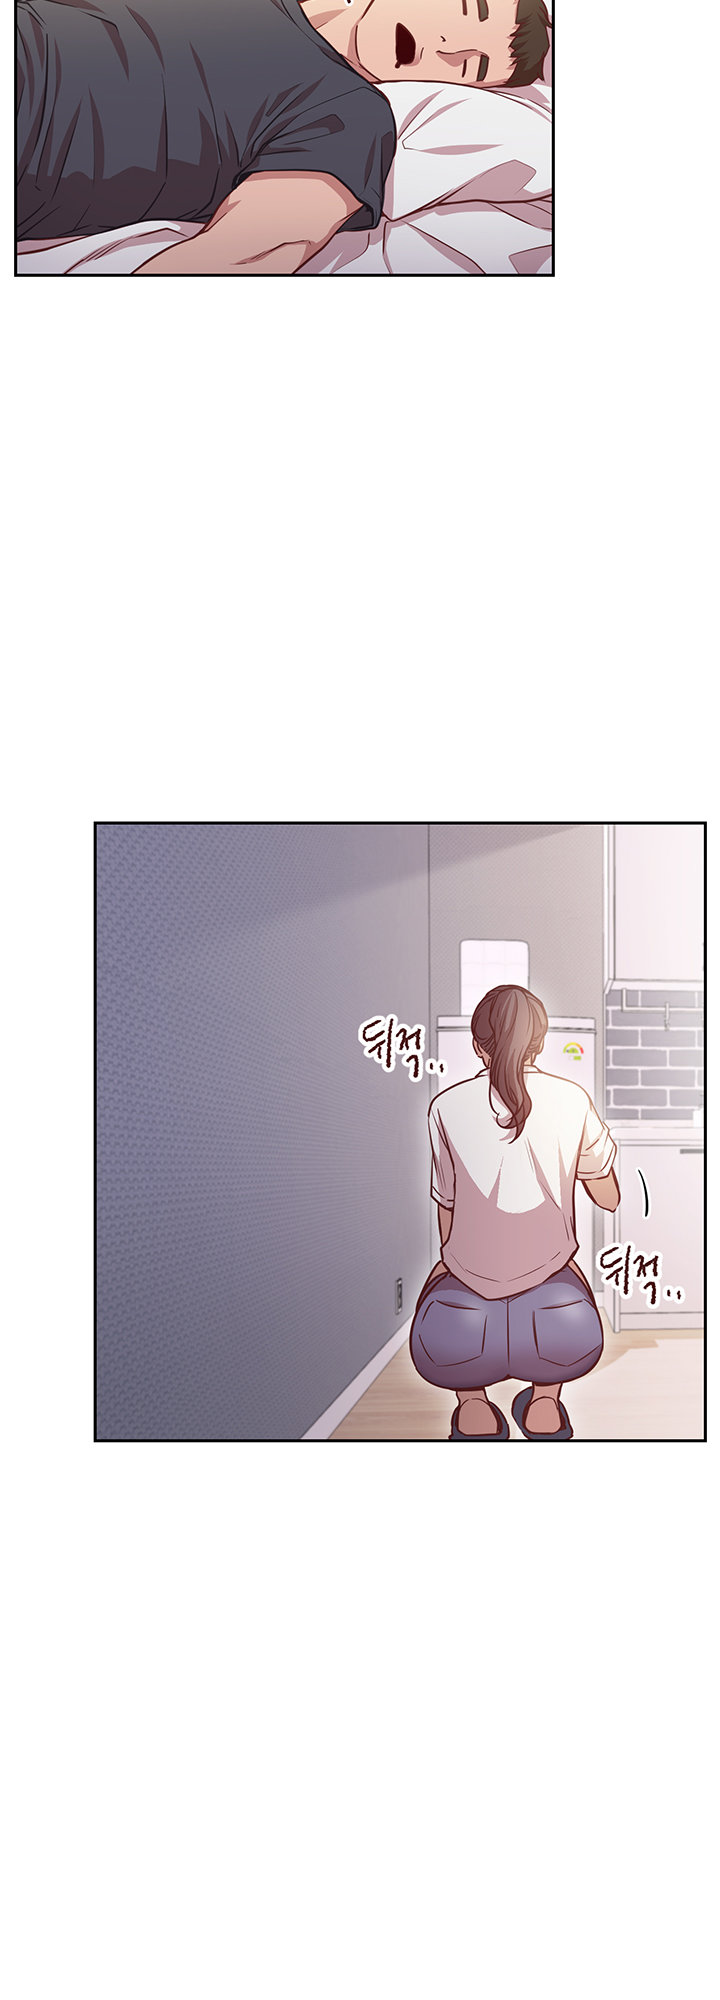 How About This Pose? - Chapter 11 Page 22